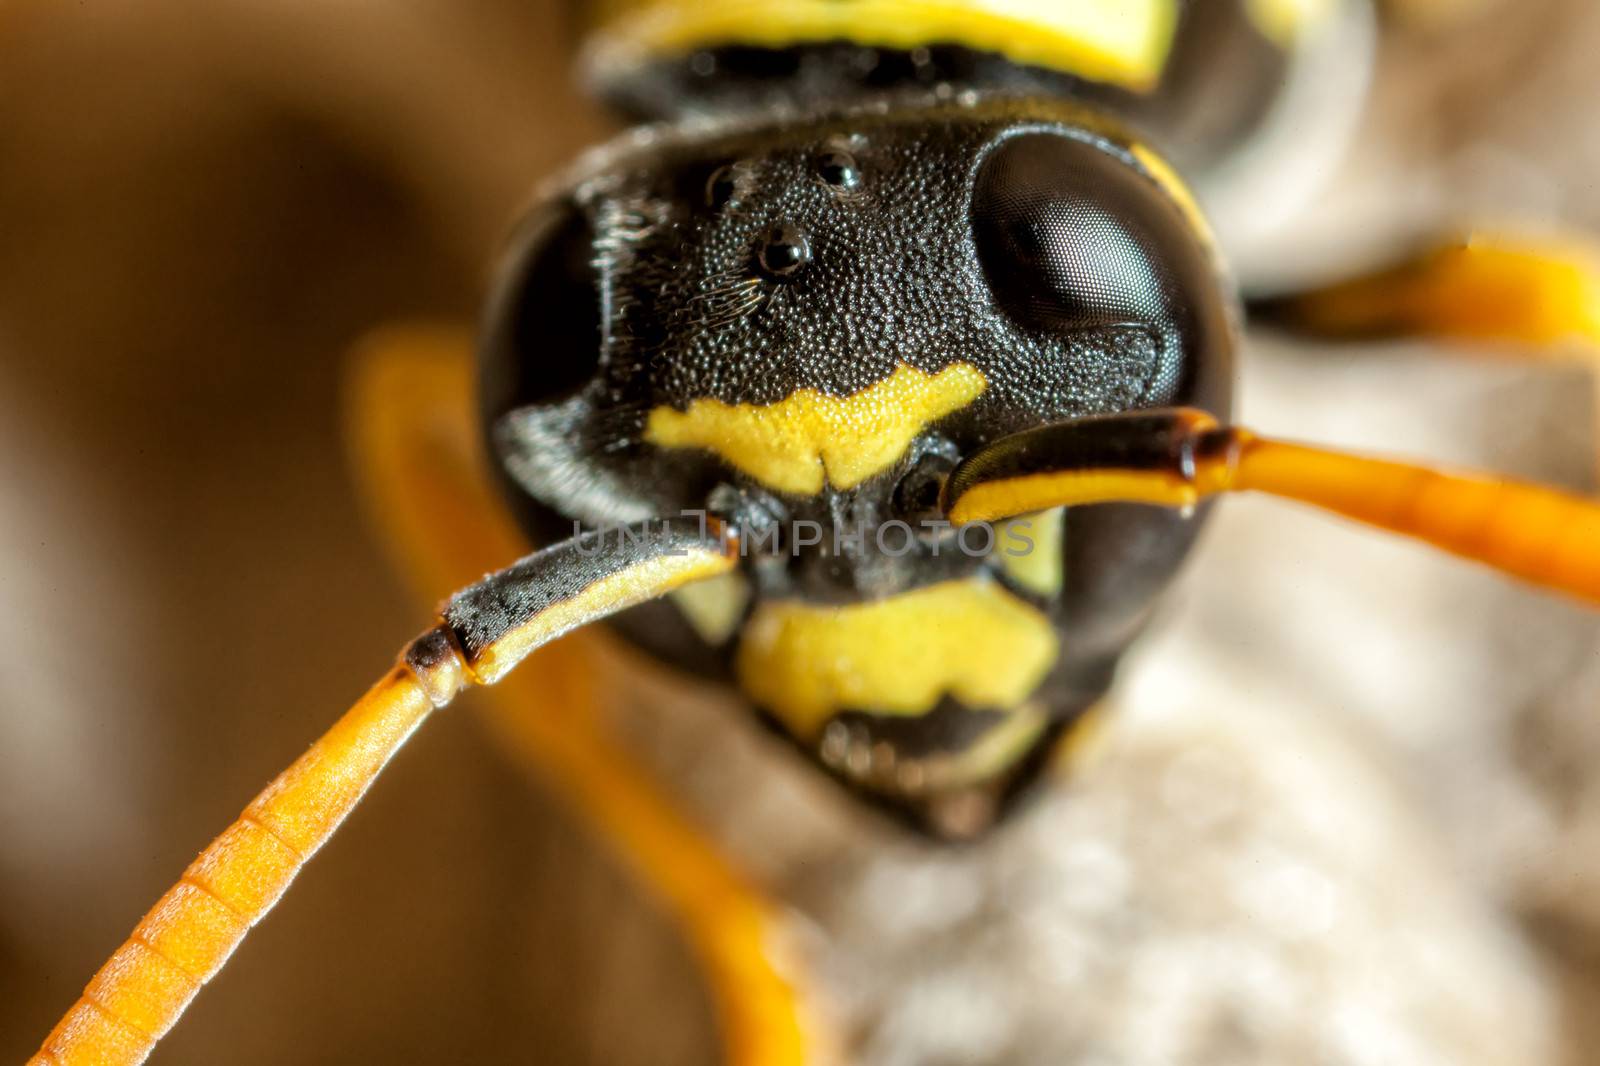 A young Paper Wasp queen shown at 5 times macro.